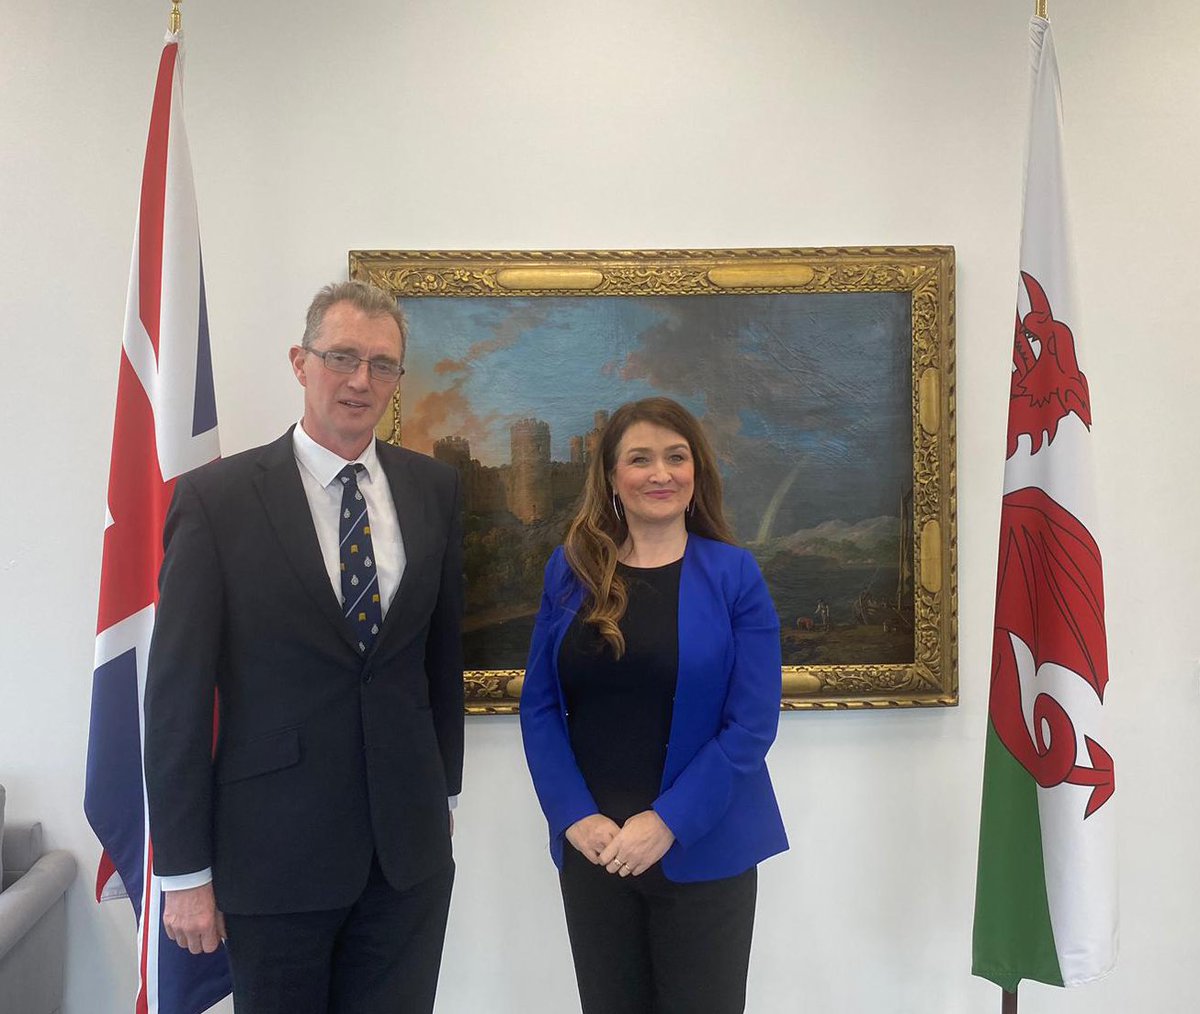 Today, Cathy spoke with the Secretary of State for Wales 🏴󠁧󠁢󠁷󠁬󠁳󠁿@DavidTCDavies. 

He’s a consistent champion for the right of women to be heard - and is a VERY important figure, given the @WelshGovernment’s attempt to lever in self ID in Wales. To which we
remain #DeliberatelyDefiant